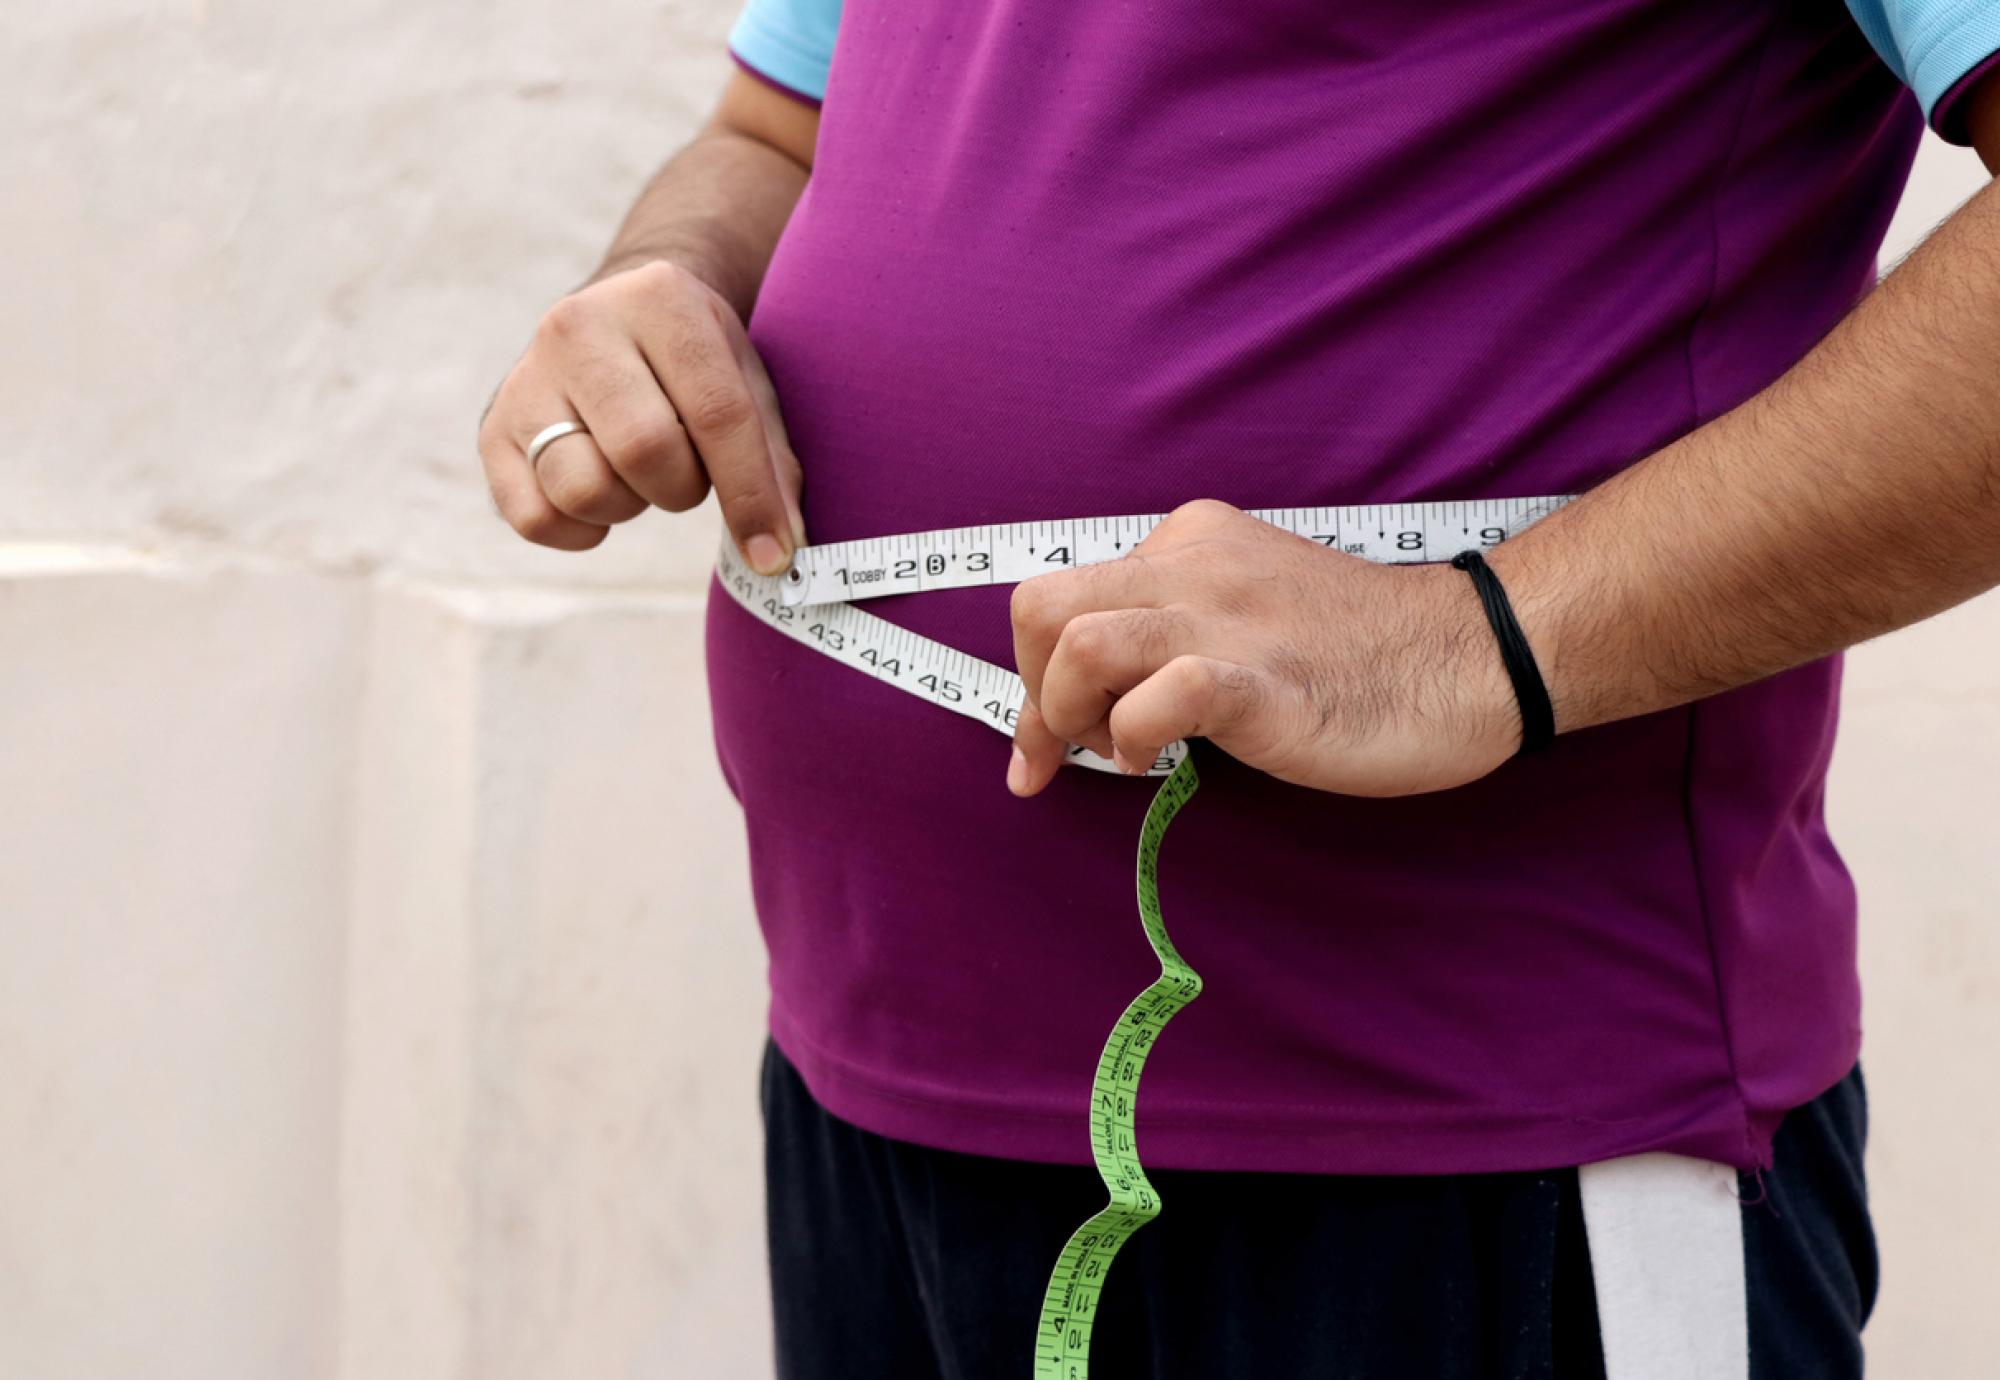 Obese person with a tape measure round their waist